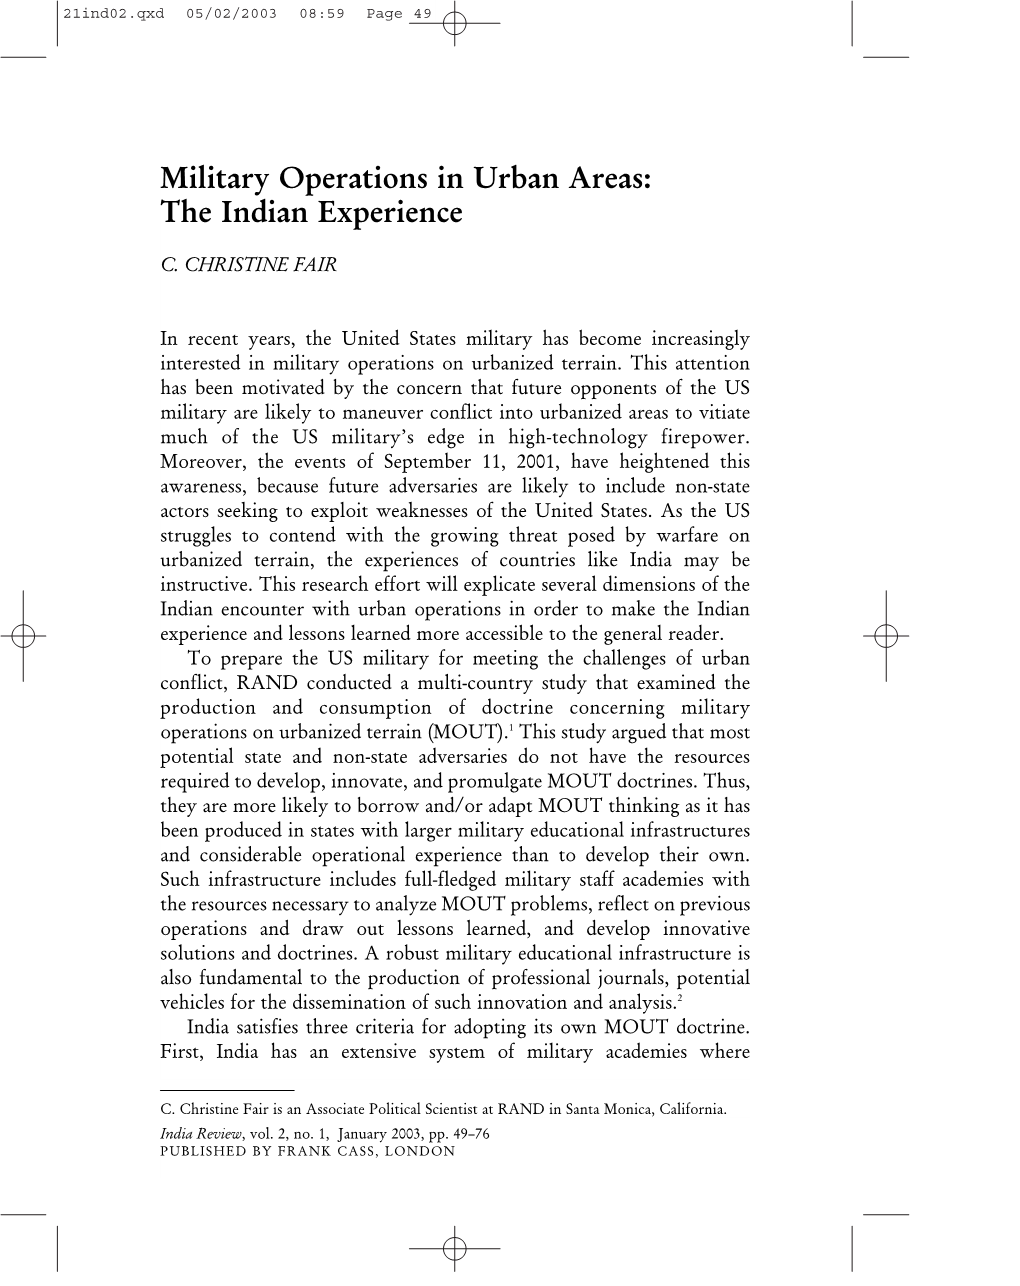 Military Operations in Urban Areas: the Indian Experience